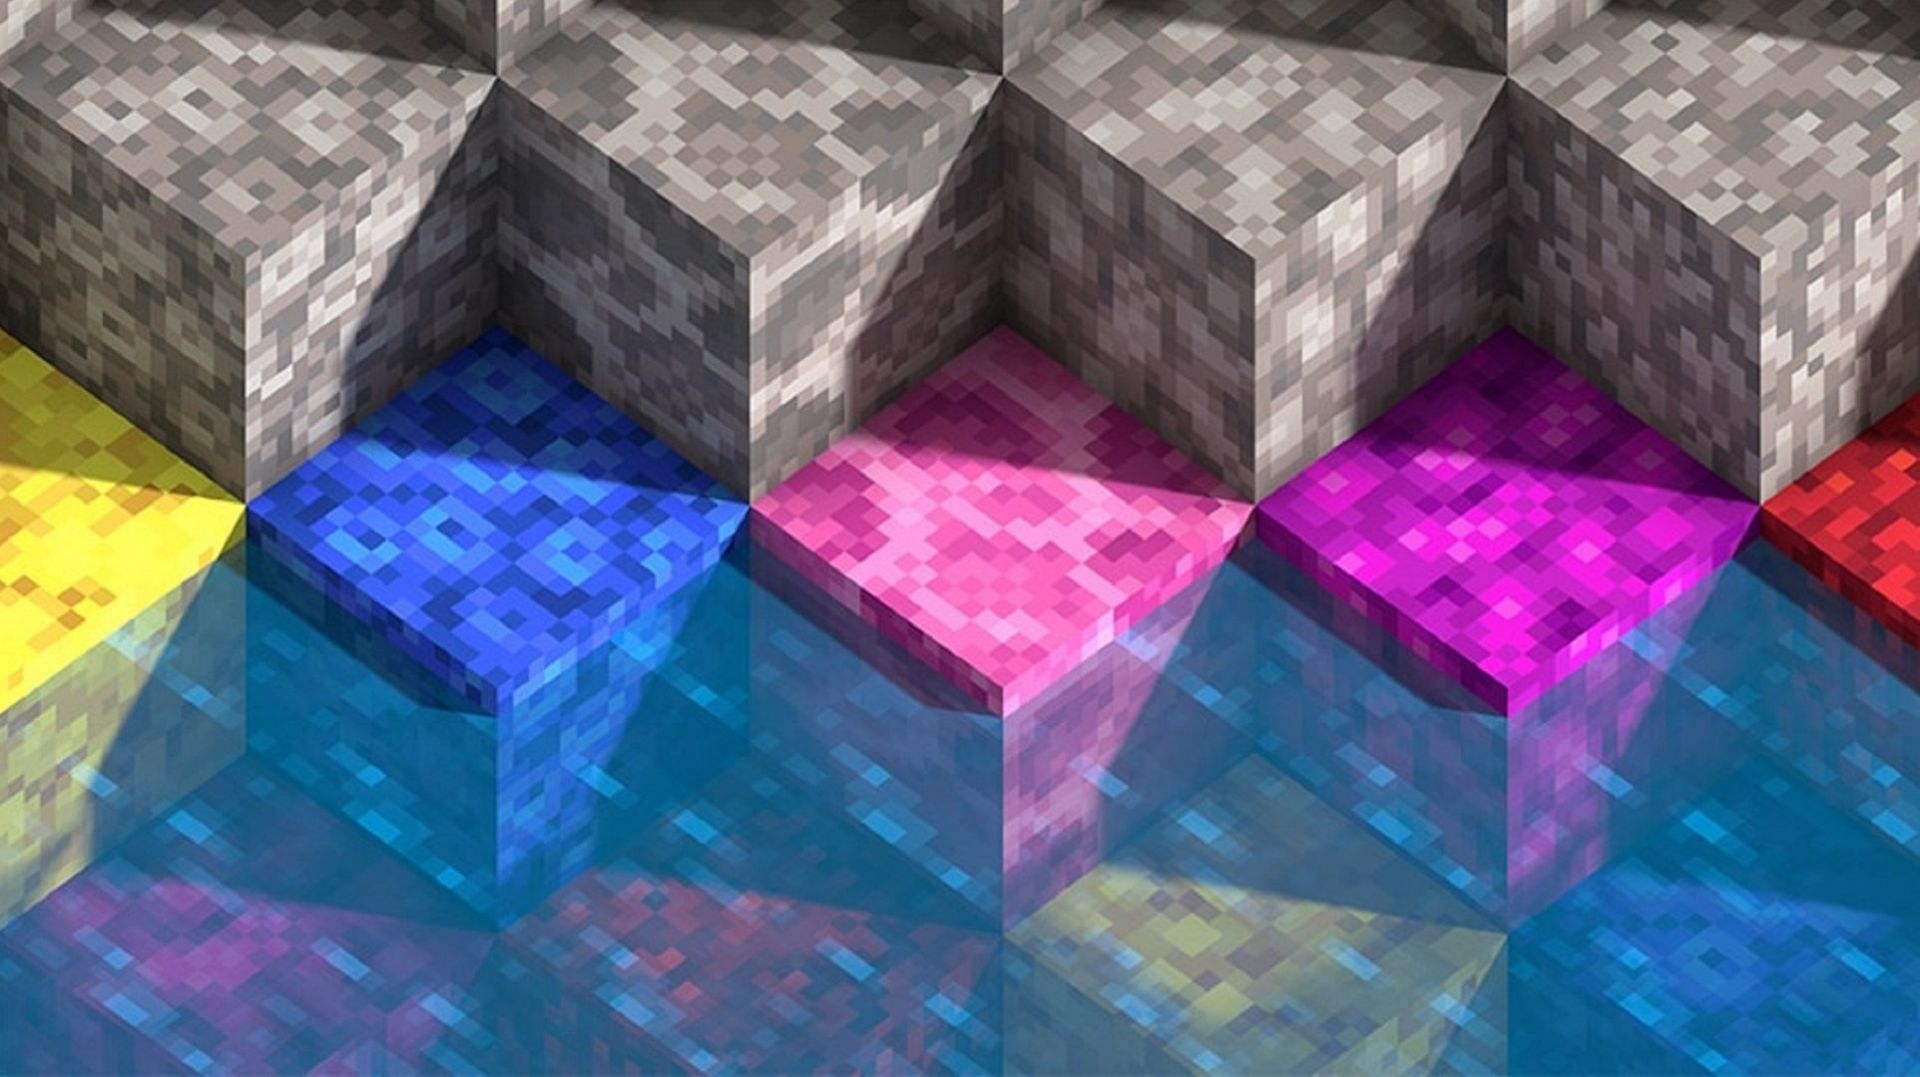 Coral and dead coral blocks placed side by side (Image via Minecraft.net)